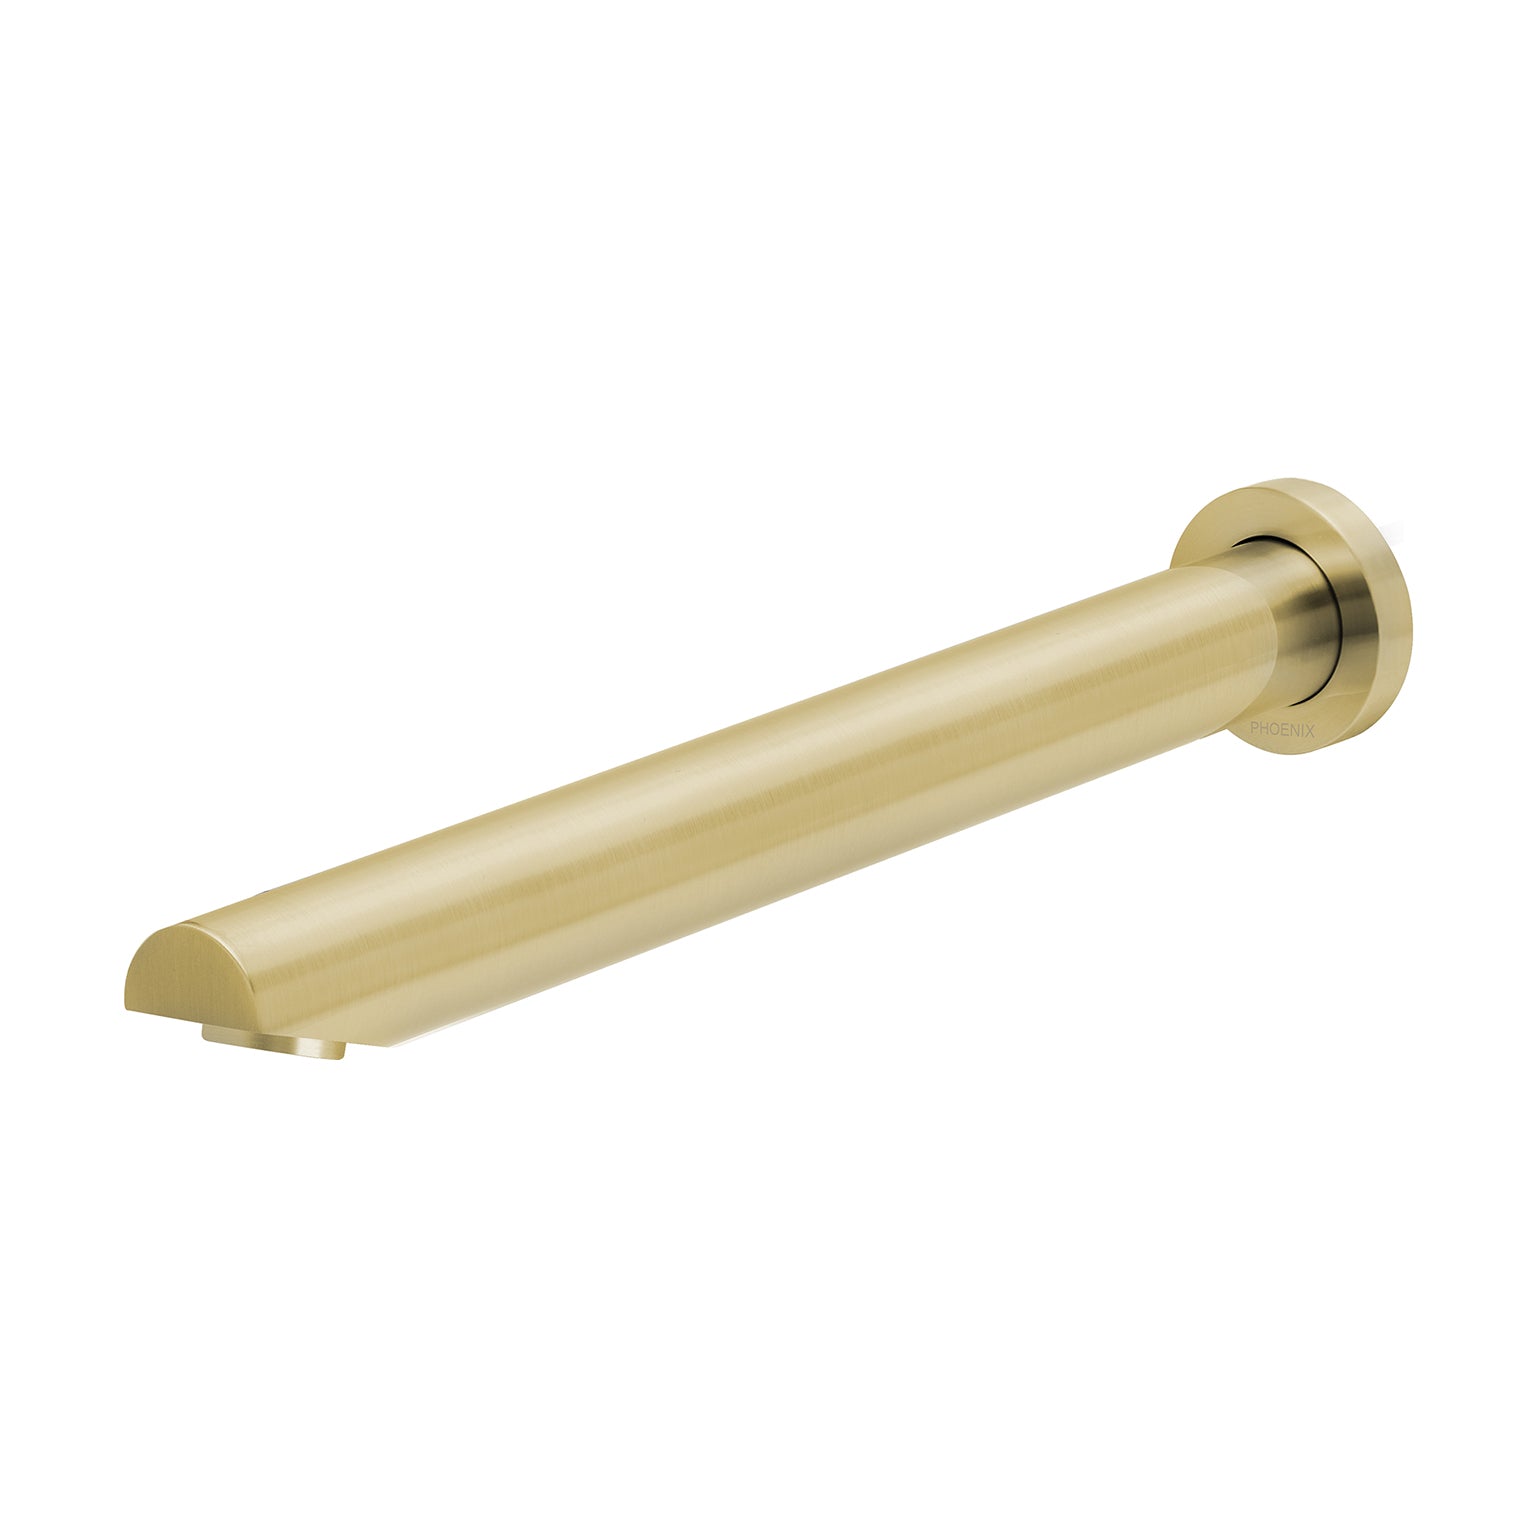 PHOENIX WALL BATH OUTLET ANGLED 32MM X 300MM BRUSHED GOLD